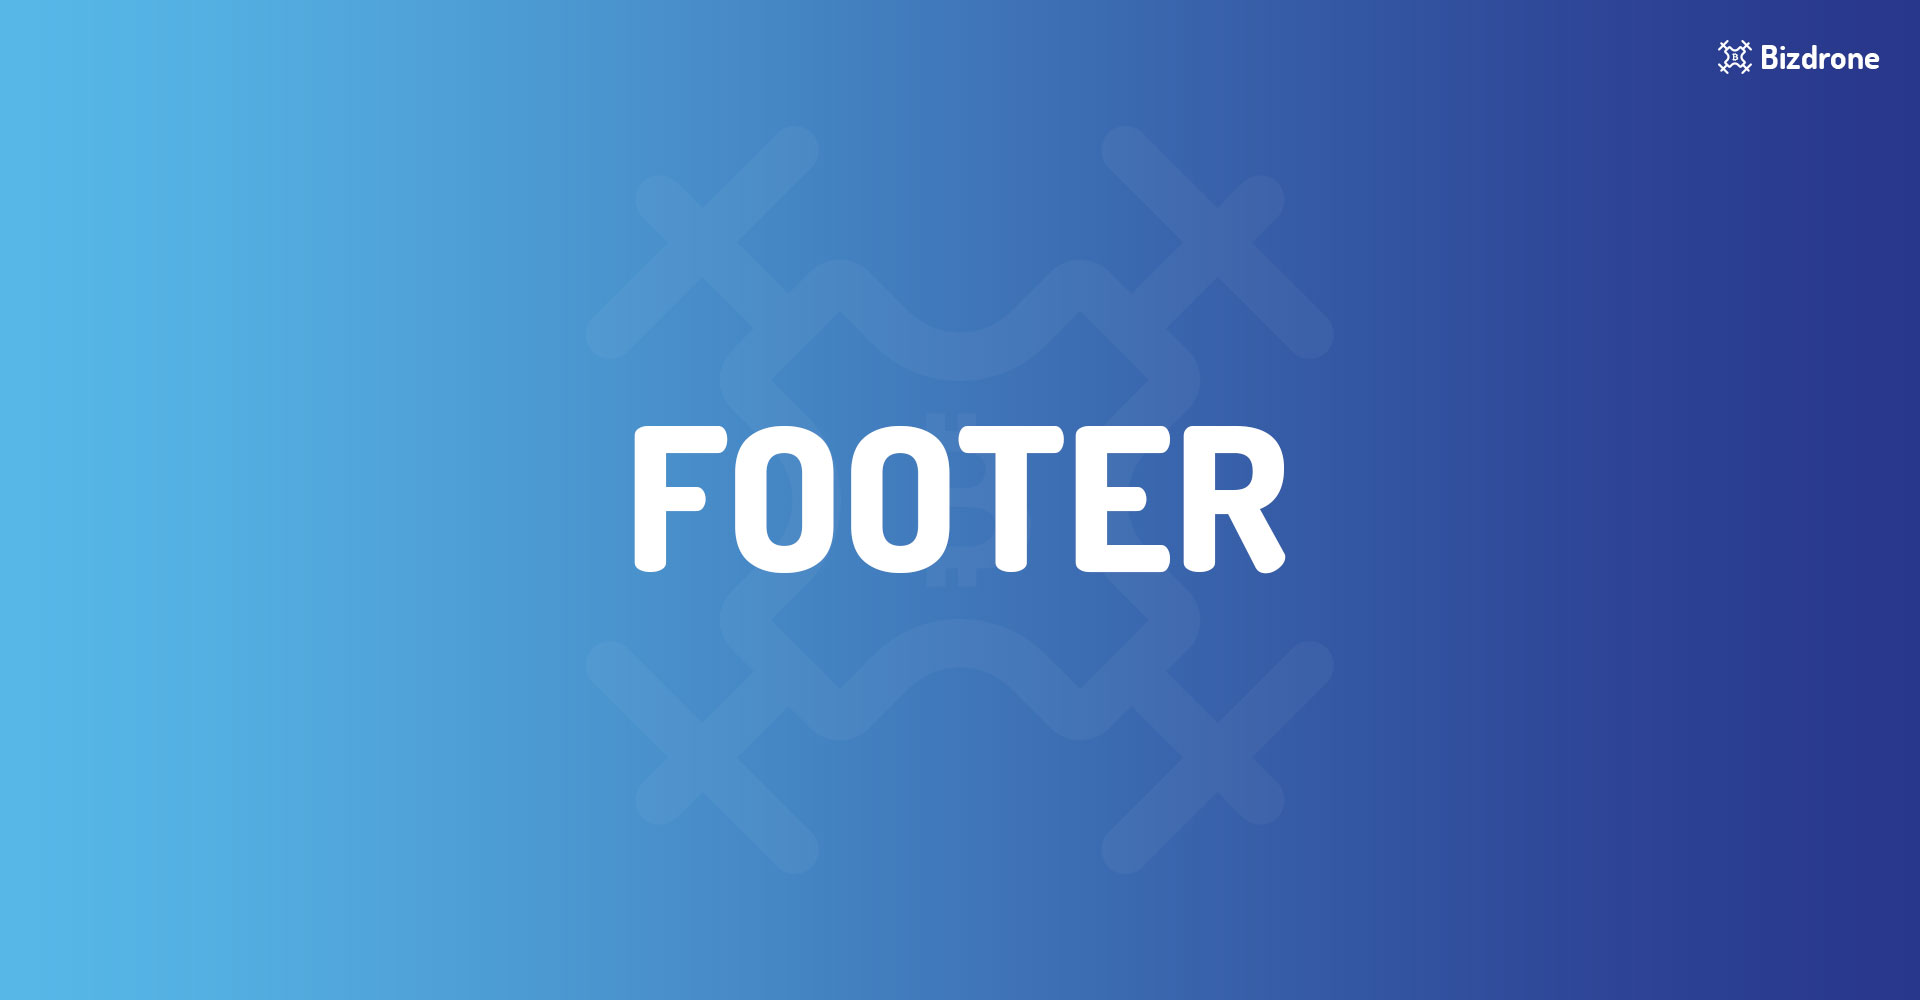 Footer